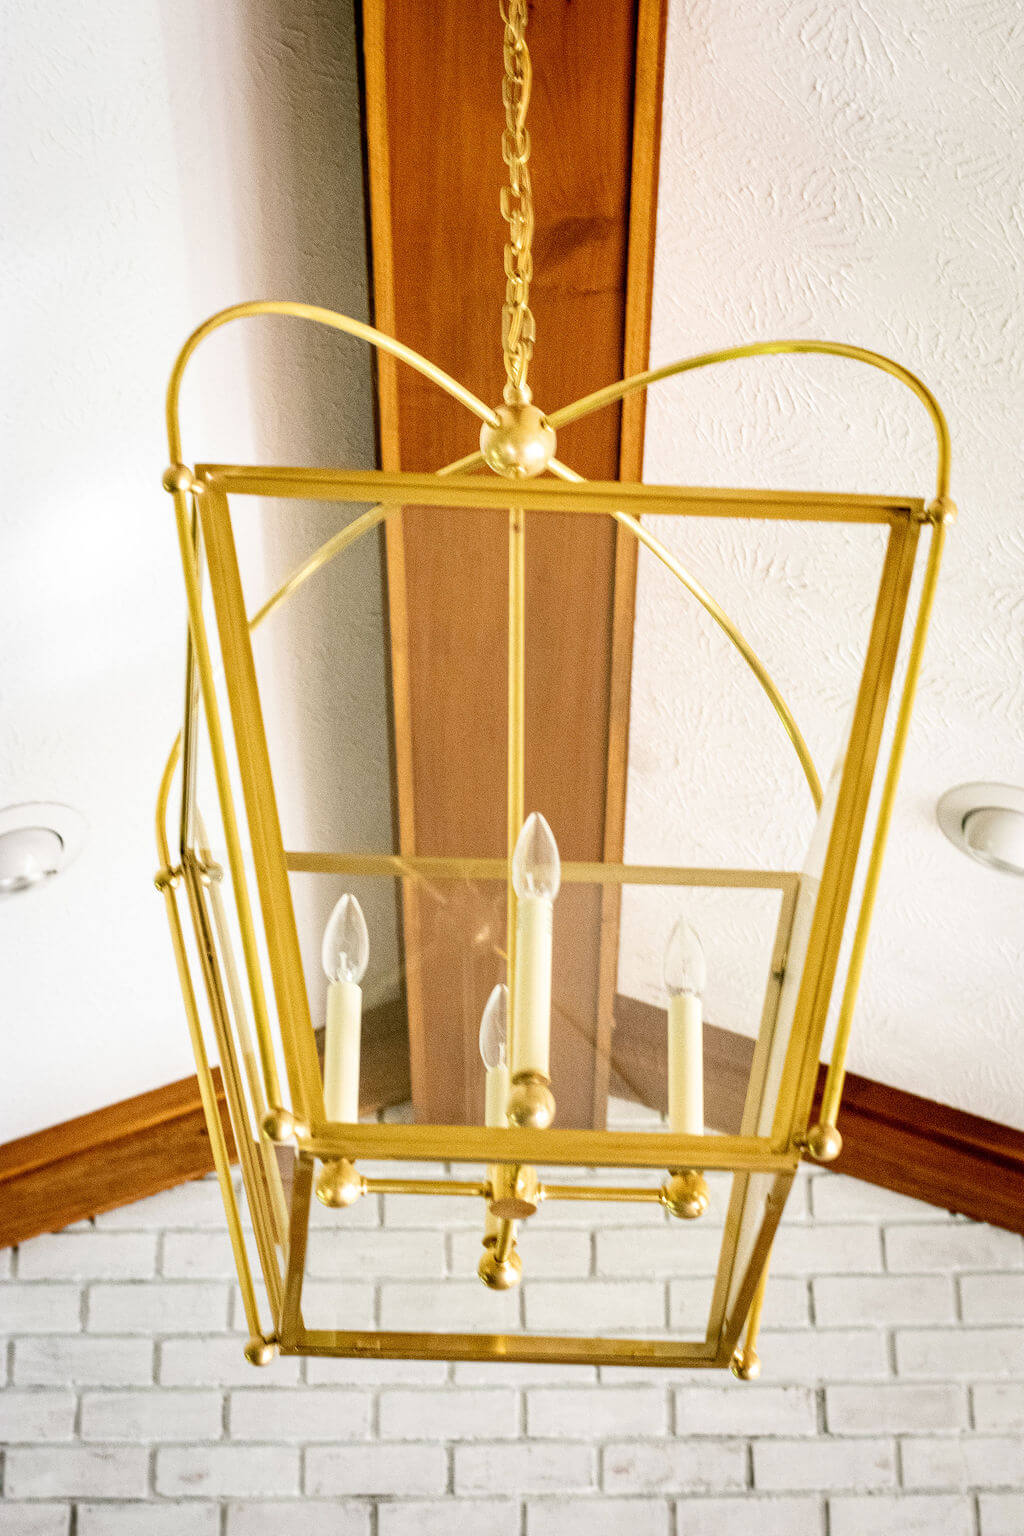 brushed brass lantern replacement for fan in Family Room space Lindsey Putzier Design Studio